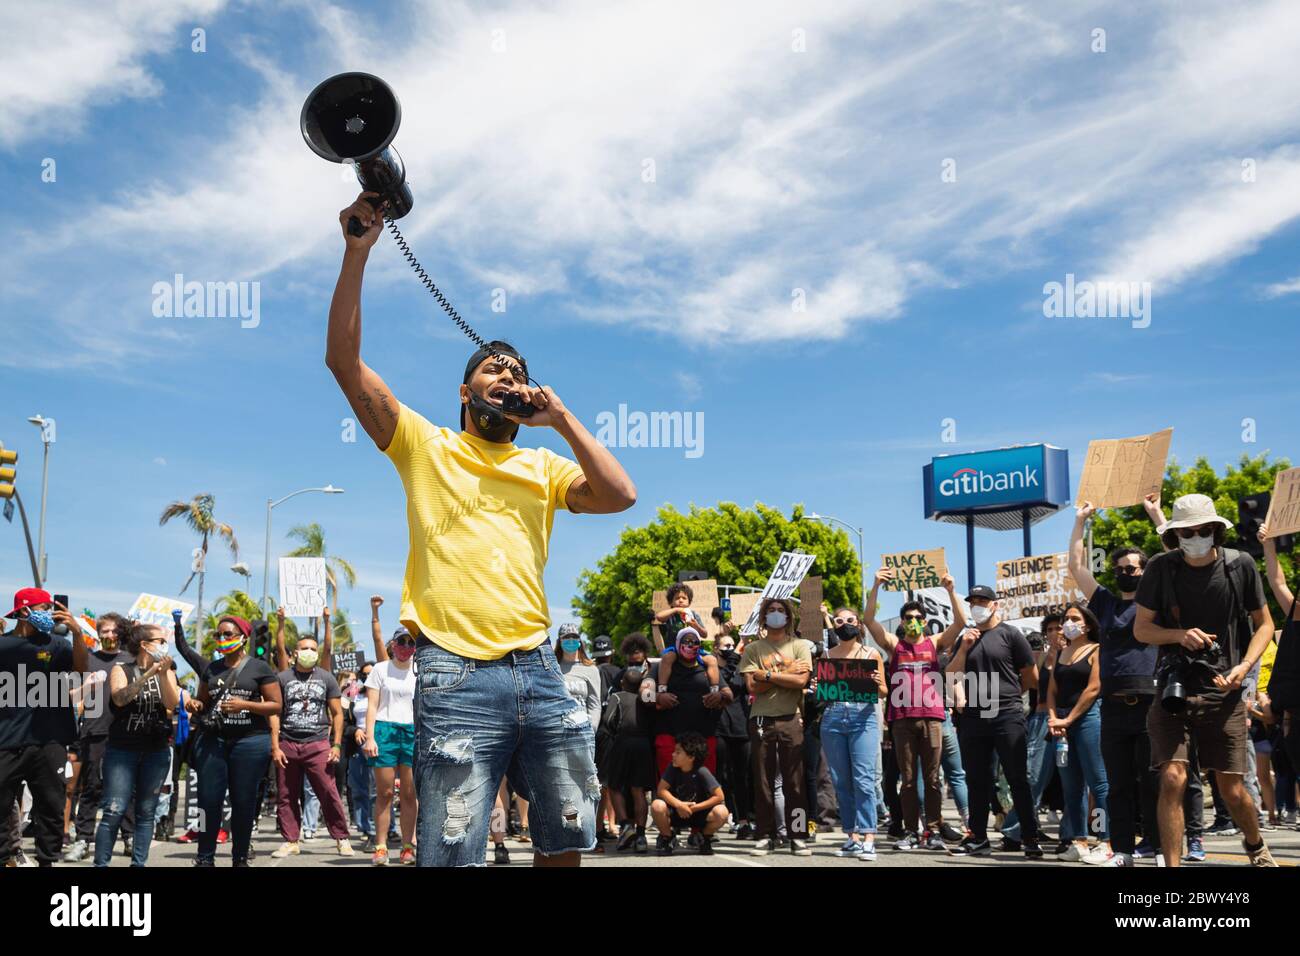 Activist with bullhorn at Black Lives Matter protest over the killing of George Floyd: Fairfax District, Los Angeles, CA, USA - May 30, 2020 Stock Photo